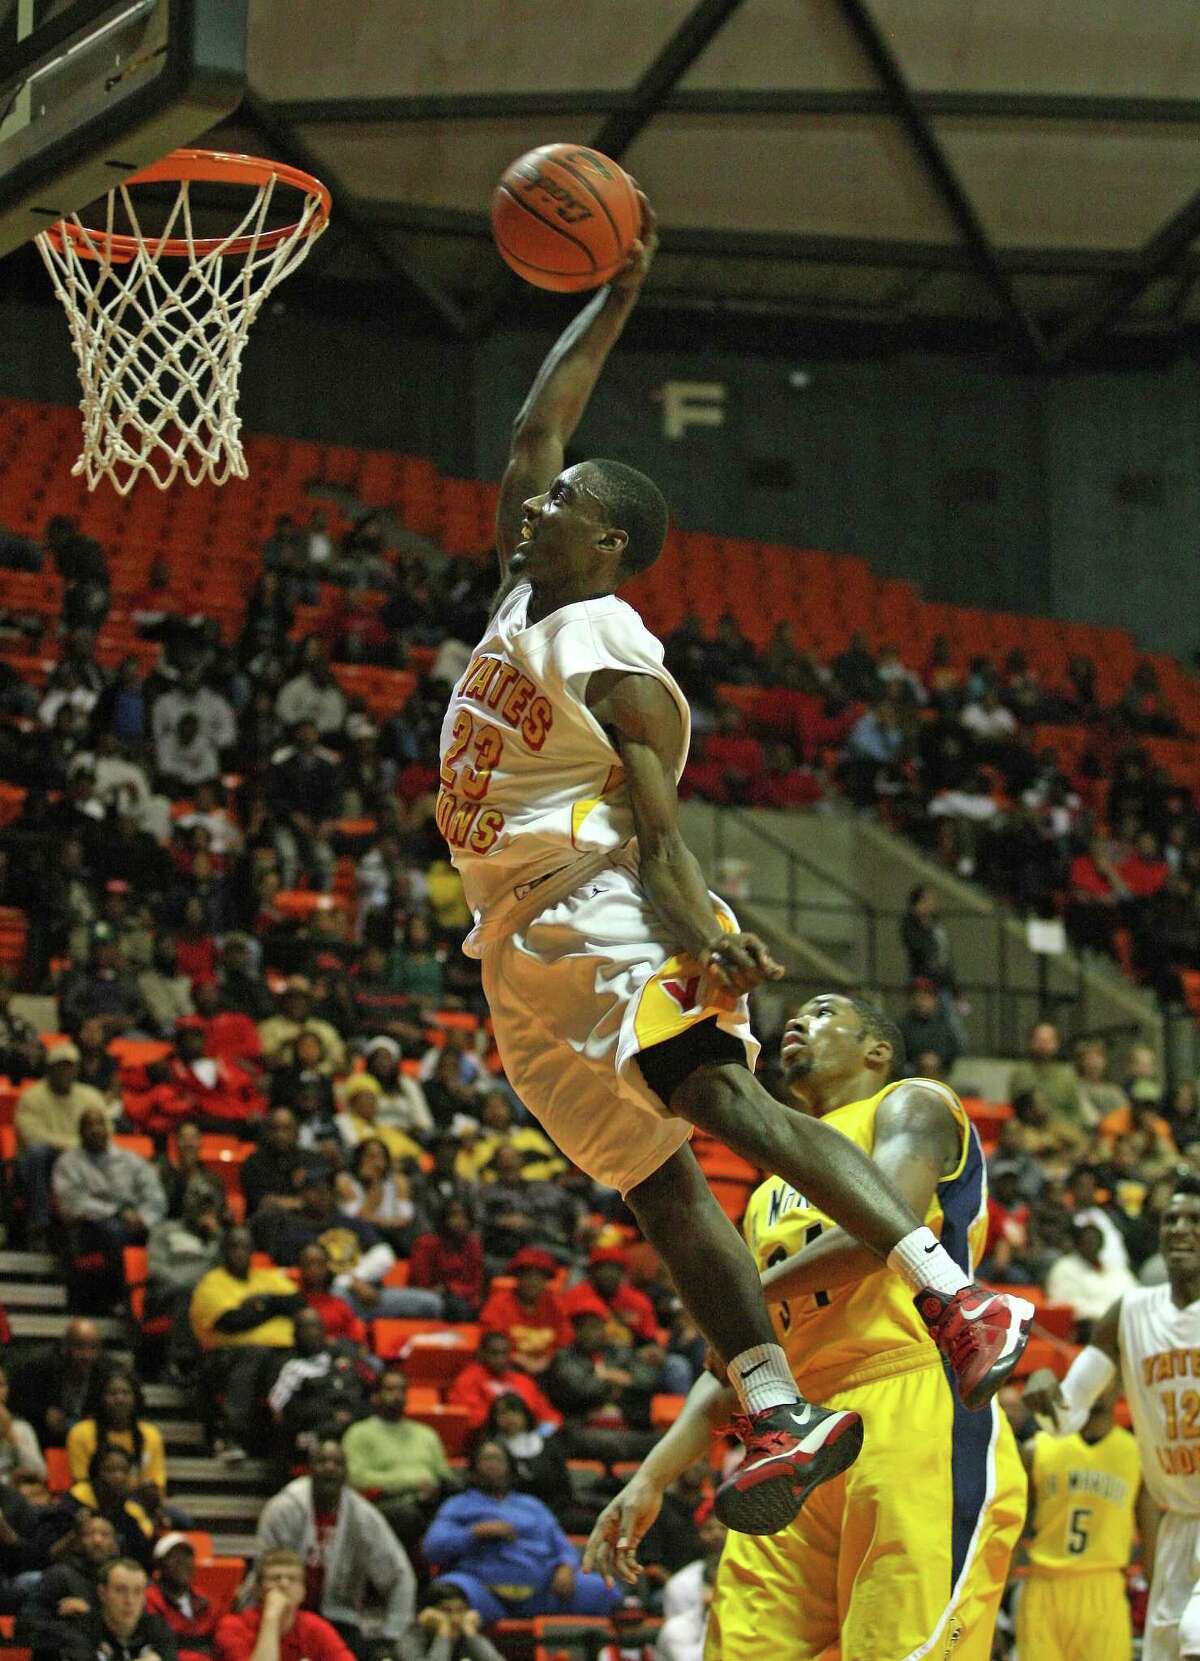 Yates (31-4) advances to the state tournament for the third year in a row and fifth time in six years thanks to dunks like this from Darrion Martin against La Marque. (Photo: Eric Christian Smith: For the Houston Chronicle)